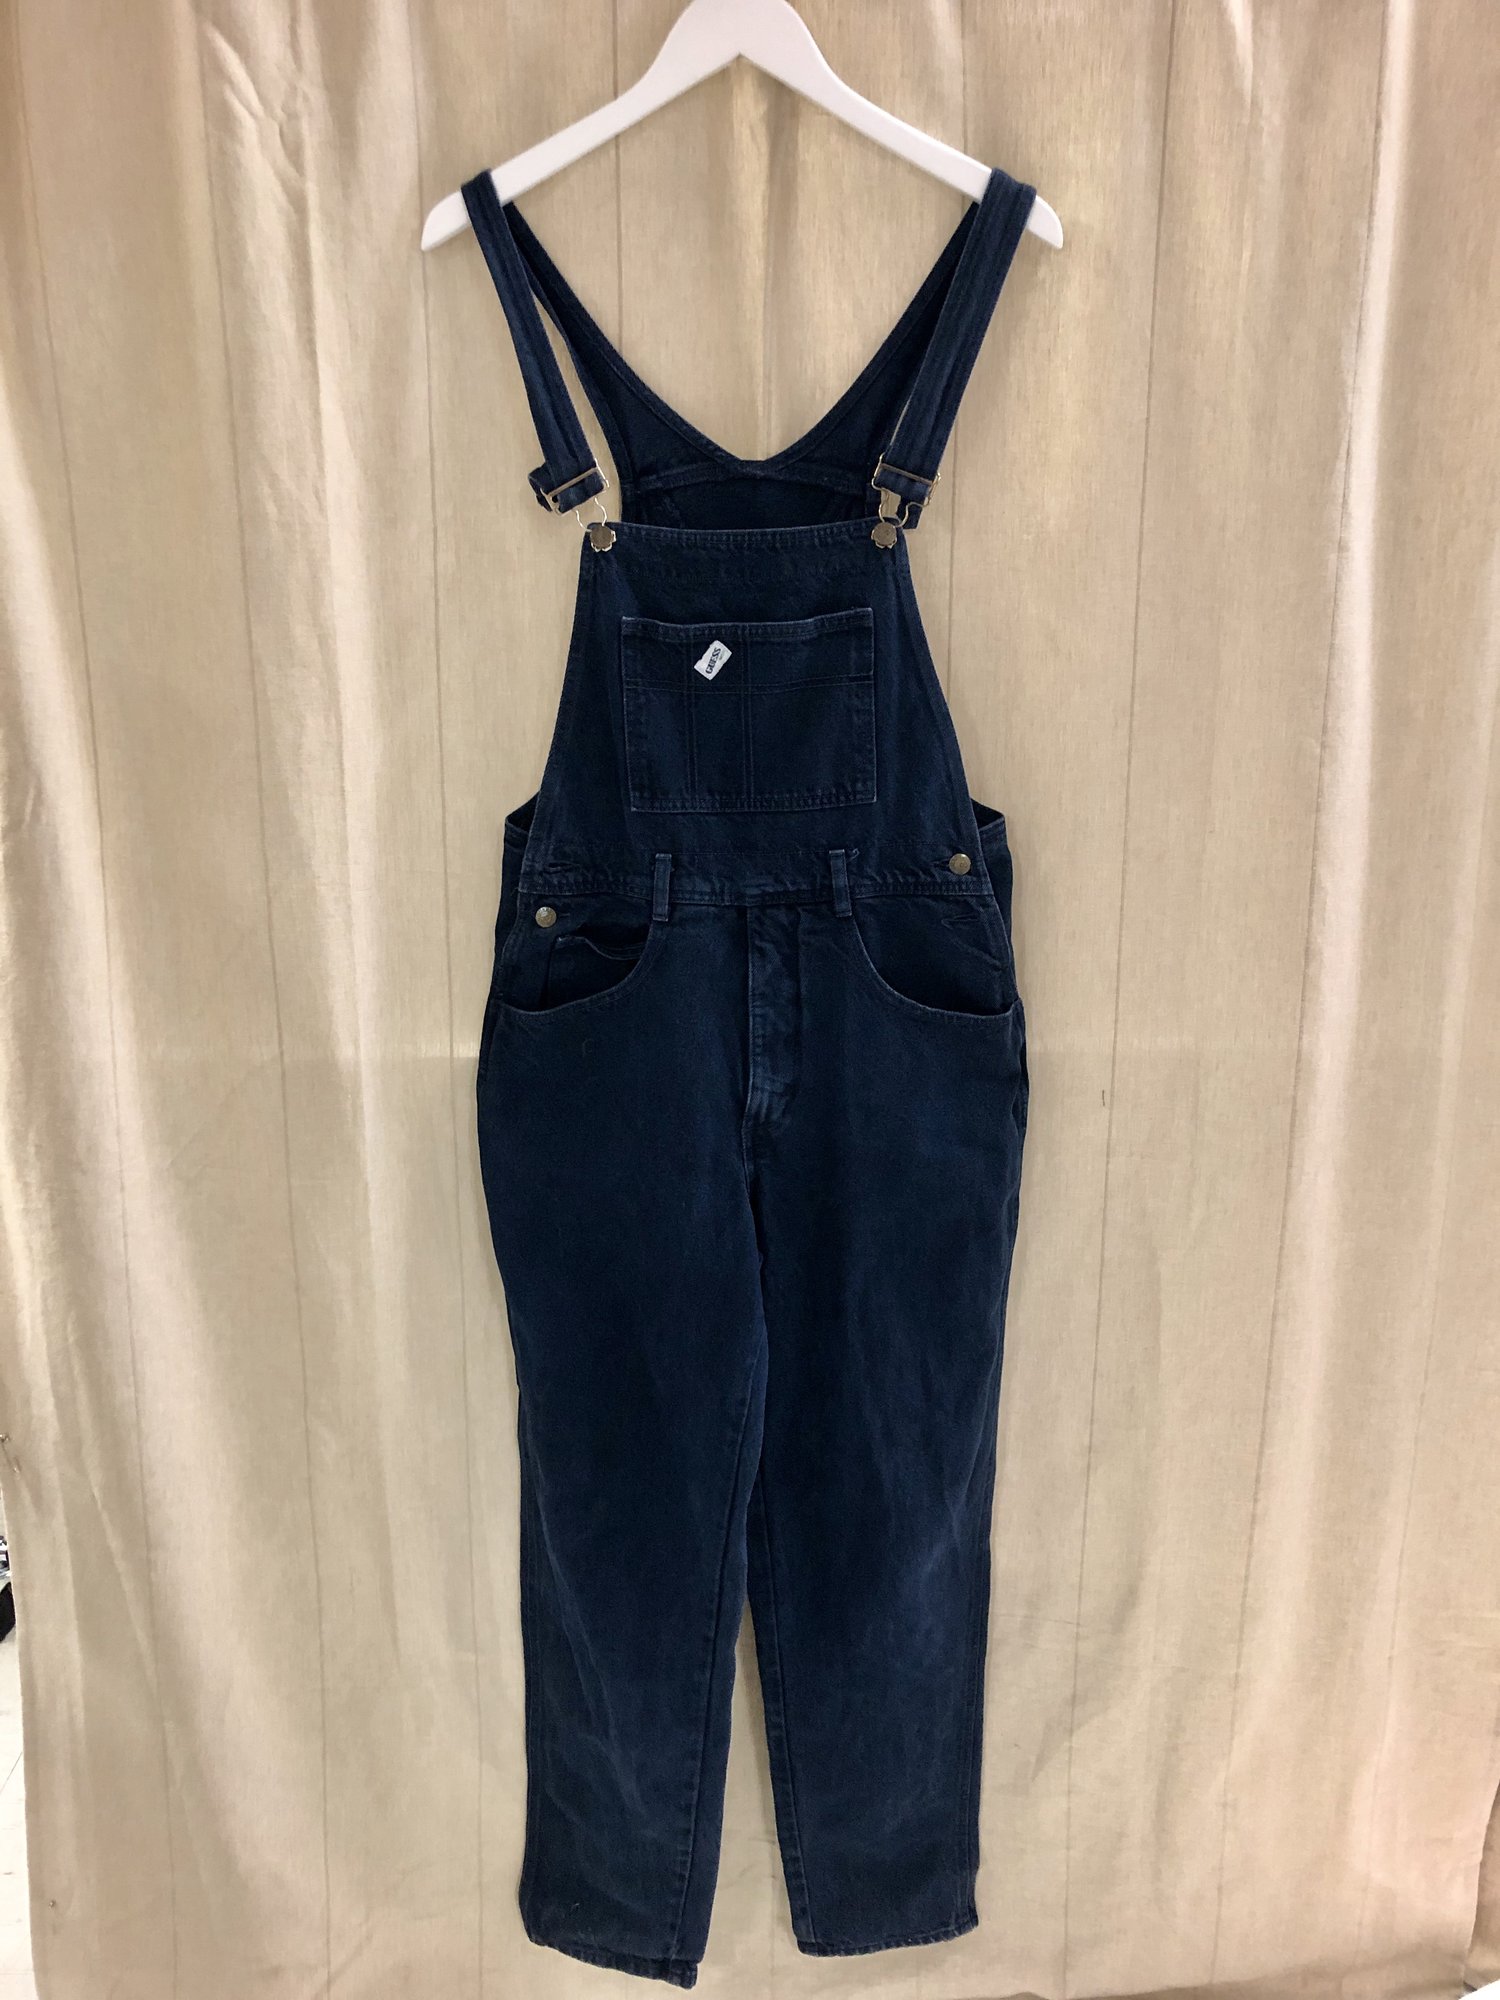 MONARCH GUESS OVERALLS - Stitched Up